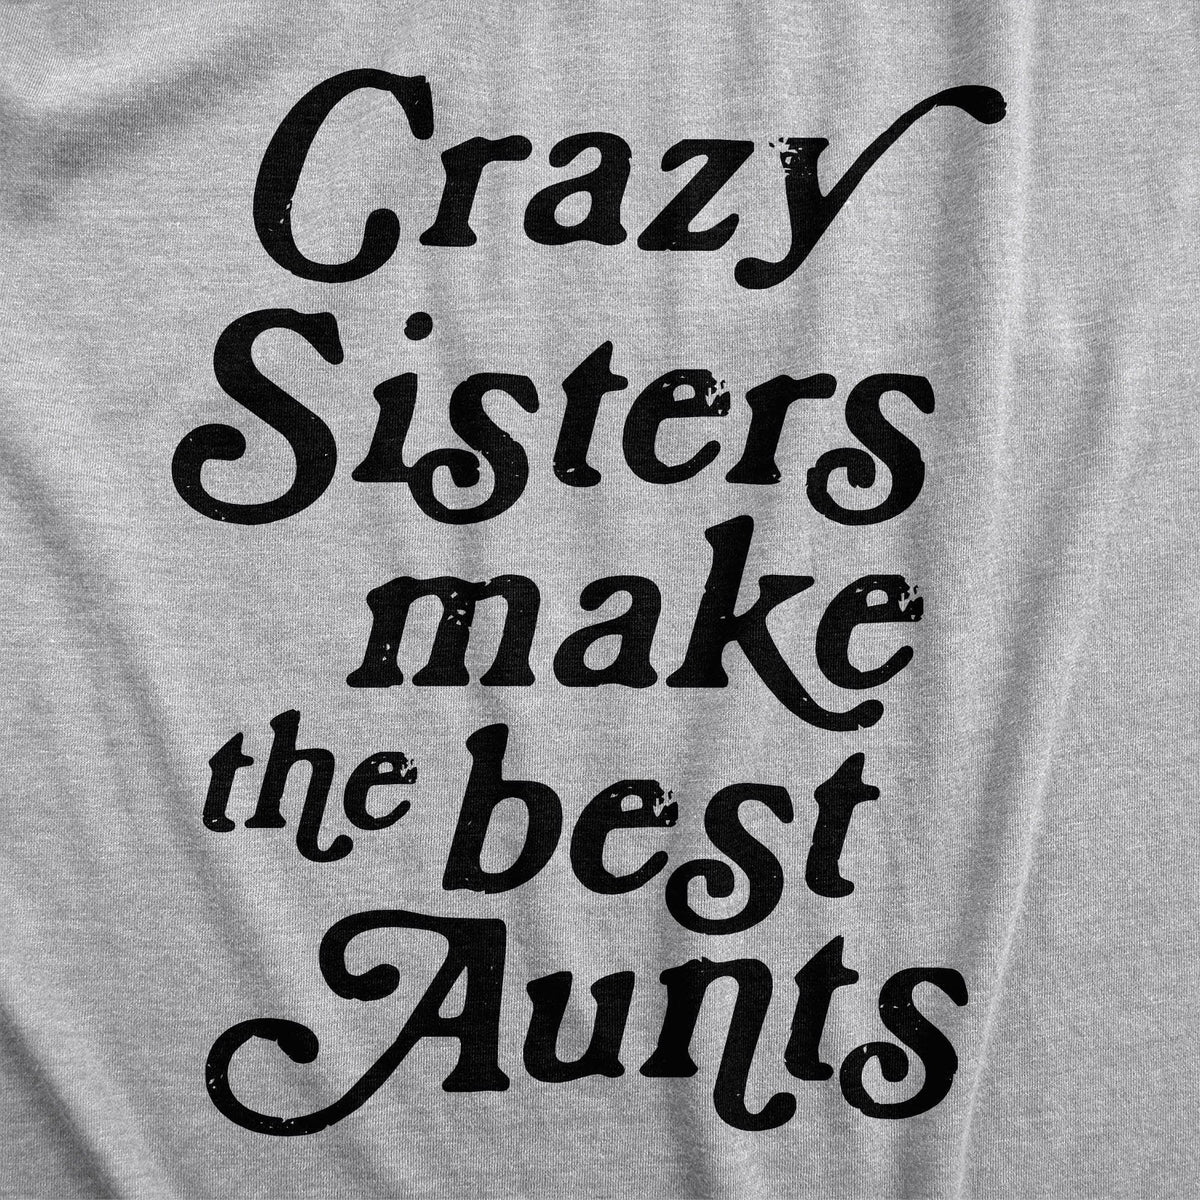 Crazy Sisters Make The Best Aunts Women&#39;s Tshirt - Crazy Dog T-Shirts